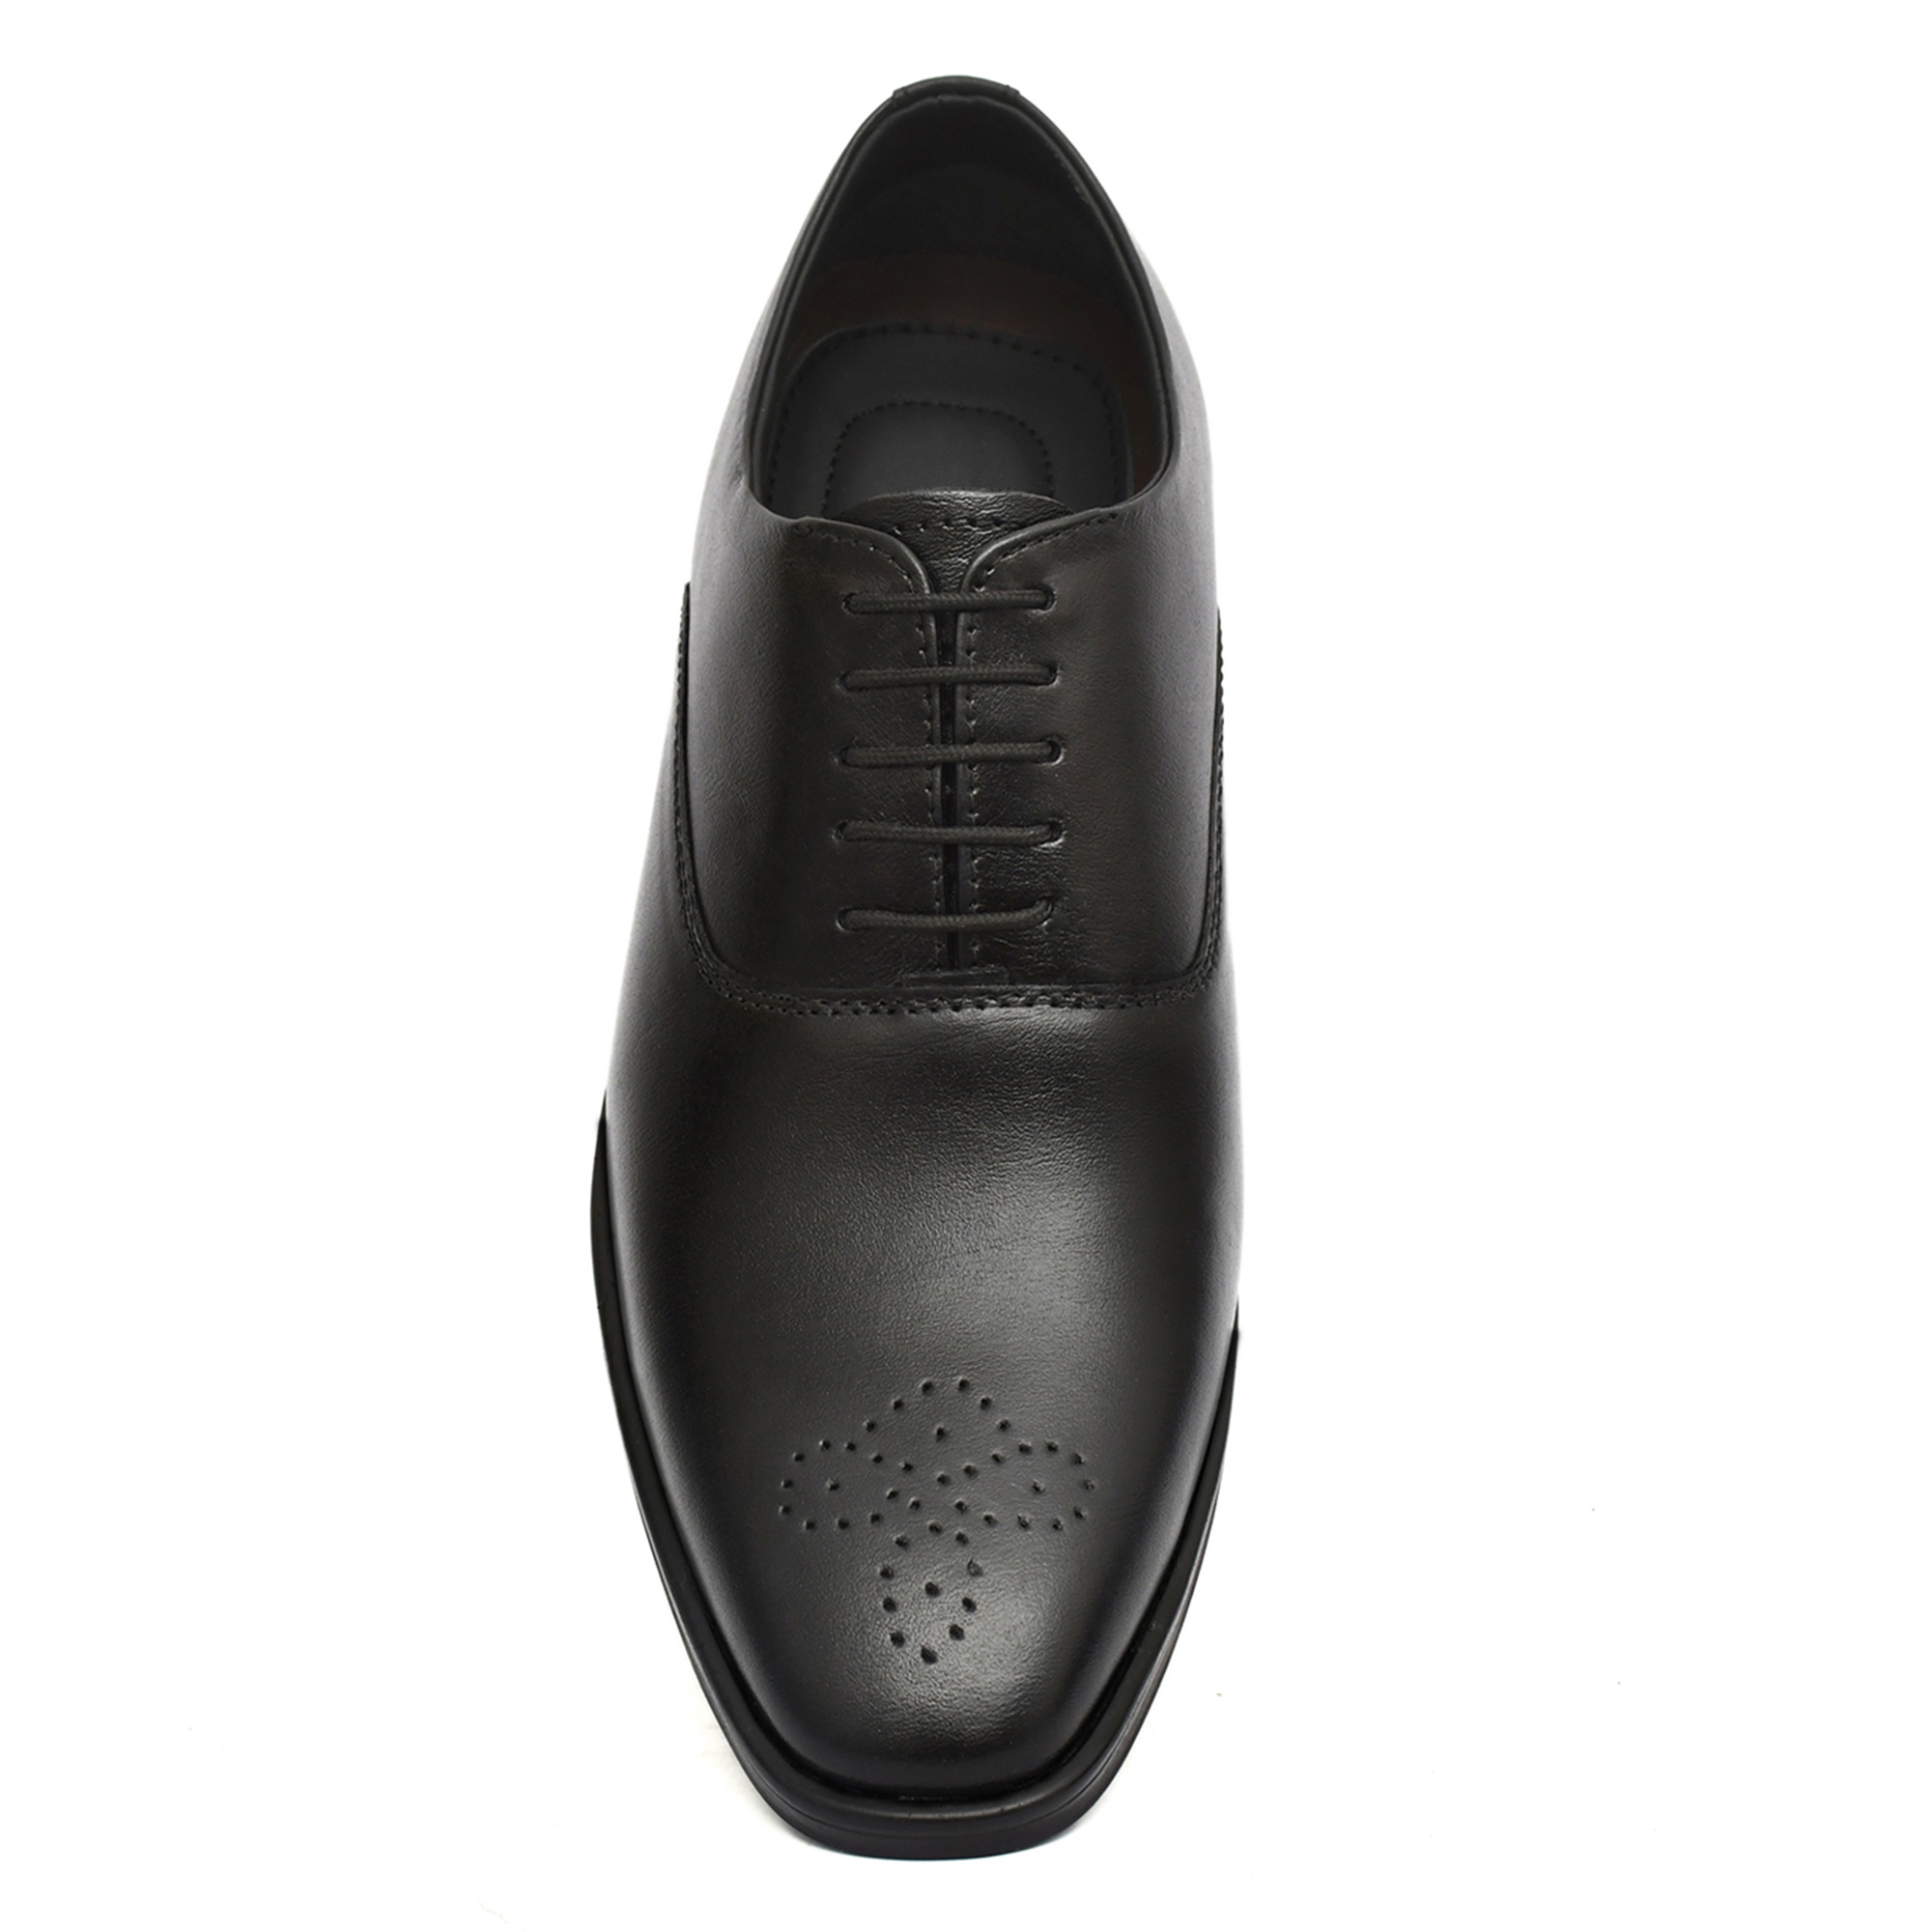 Leather Derby Shoes for men with Memory foam footpad. Article : AL02-Black